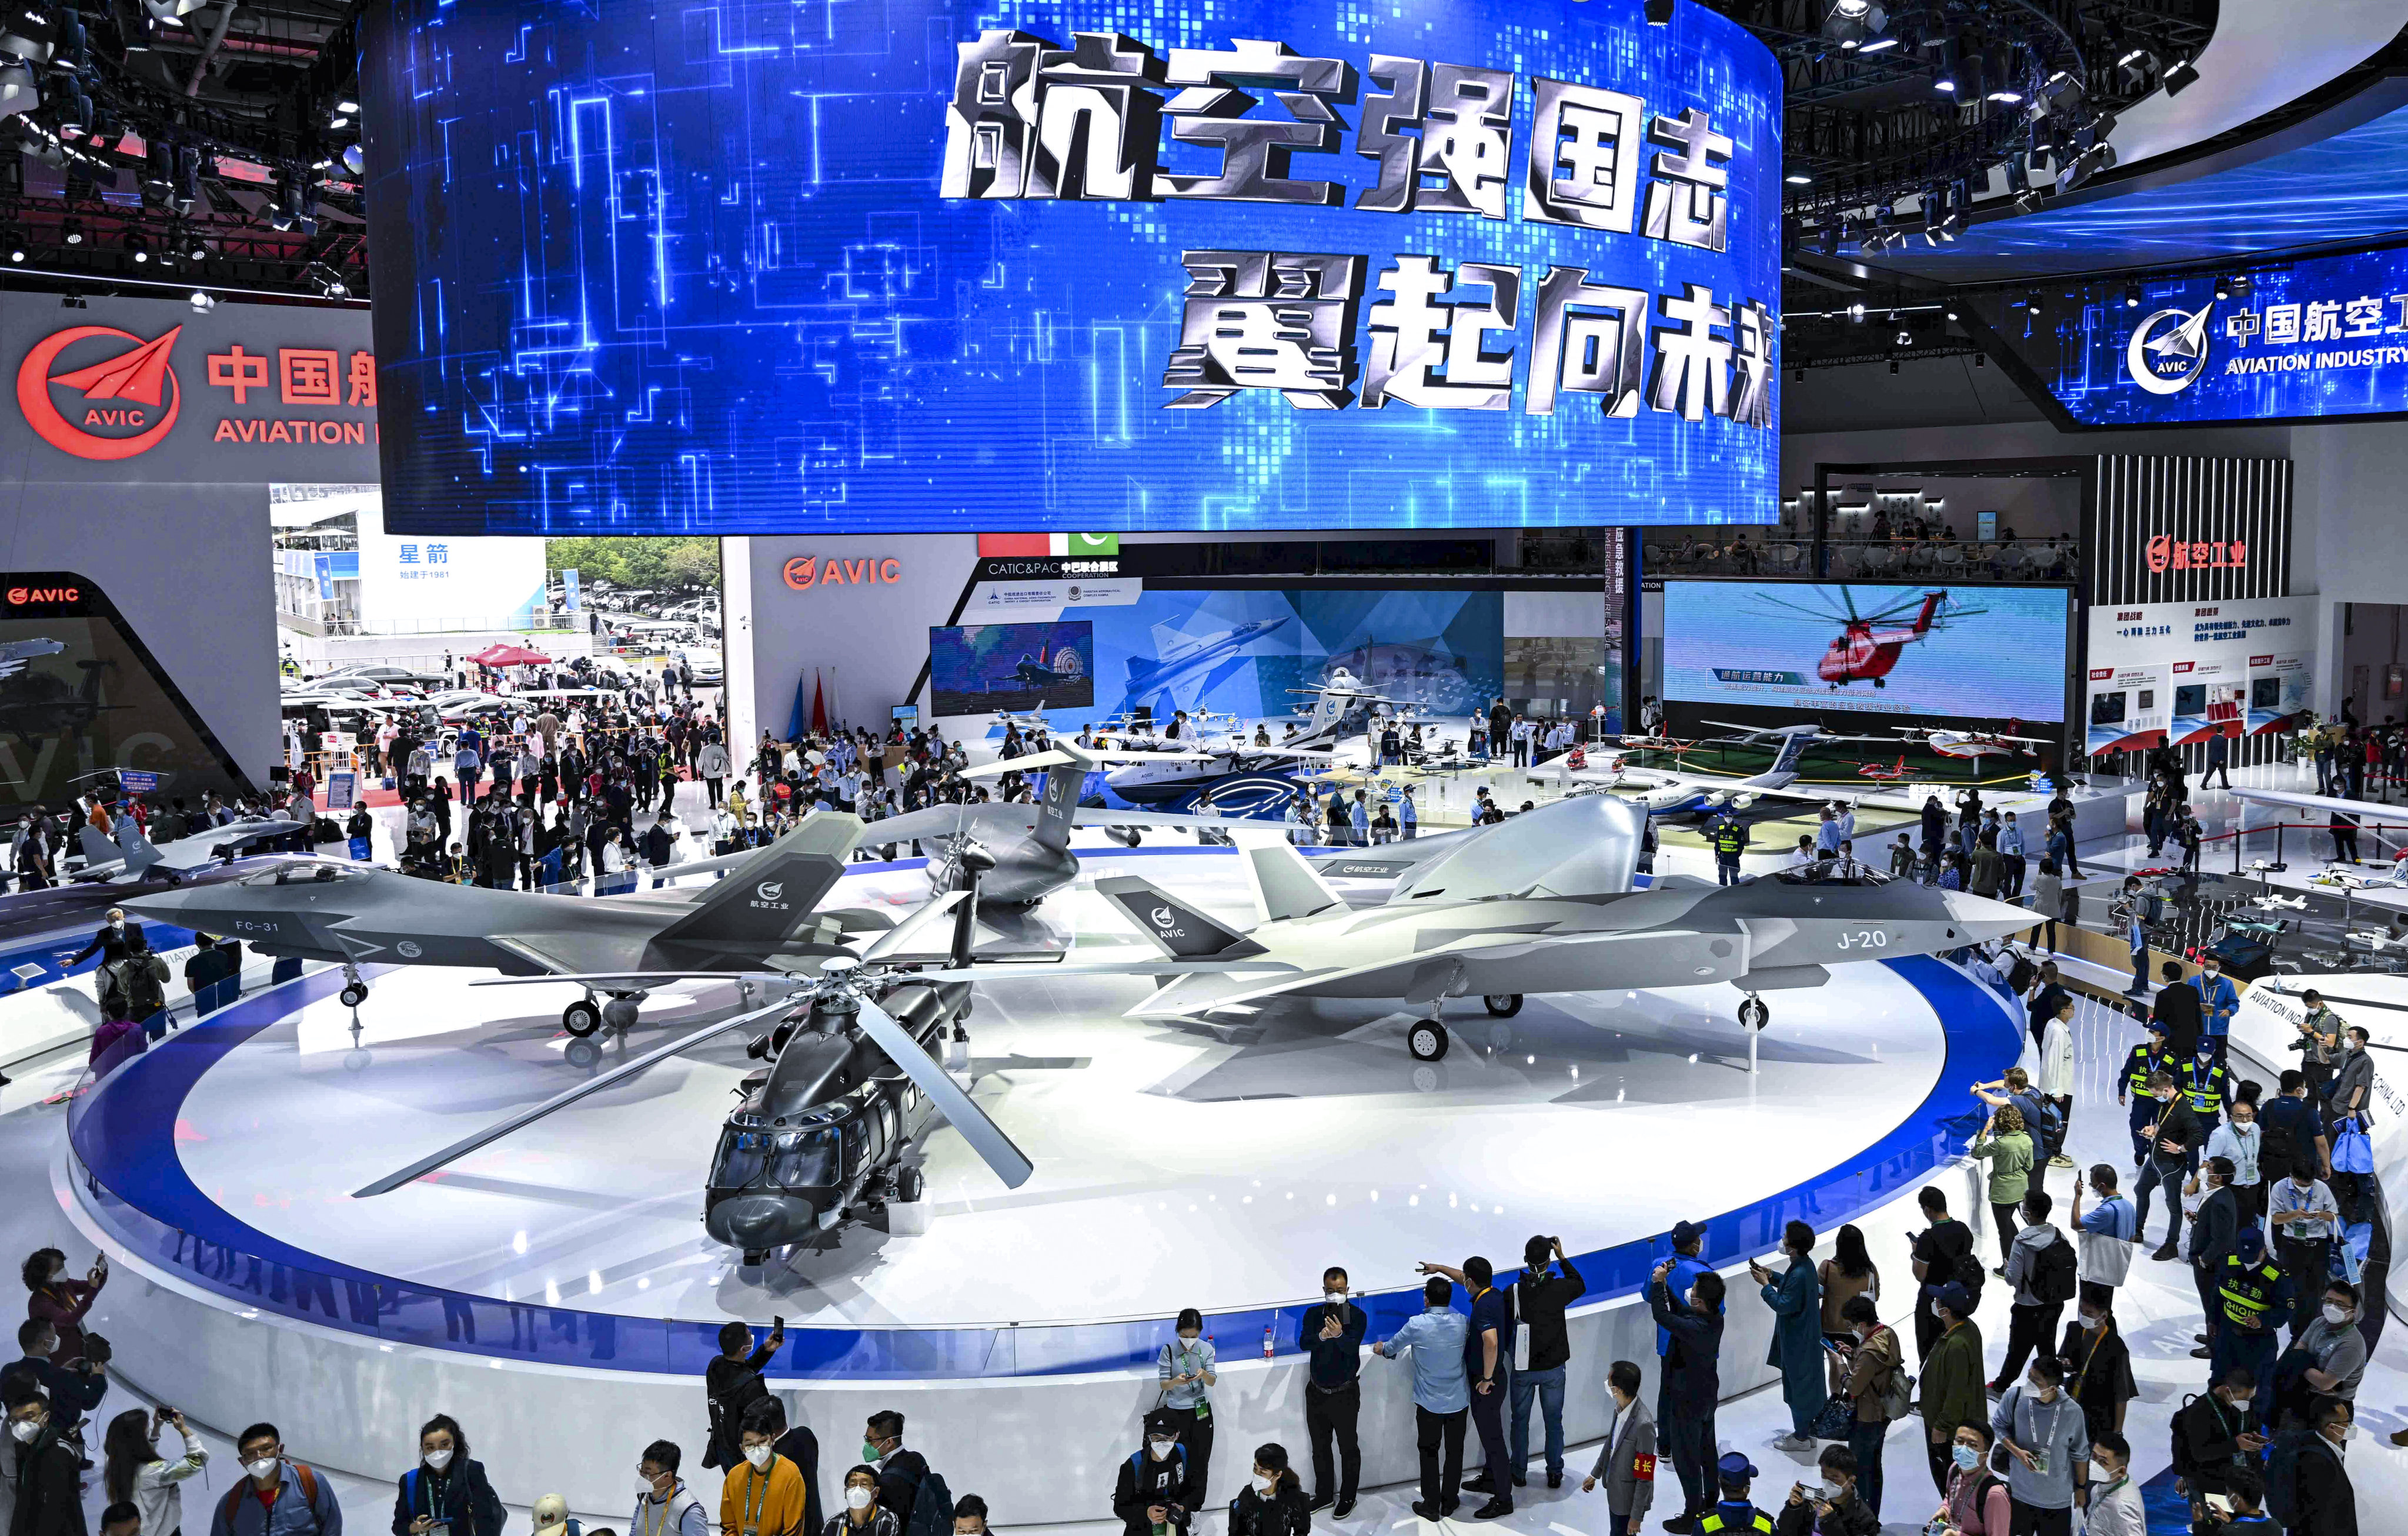 An AVIC booth at an international aviation and aerospace exhibition in China’s Zhuhai last year. The No 2 Chinese weapons company and leading military aircraft maker saw revenue rise for the second consecutive year in 2022. Photo: AP